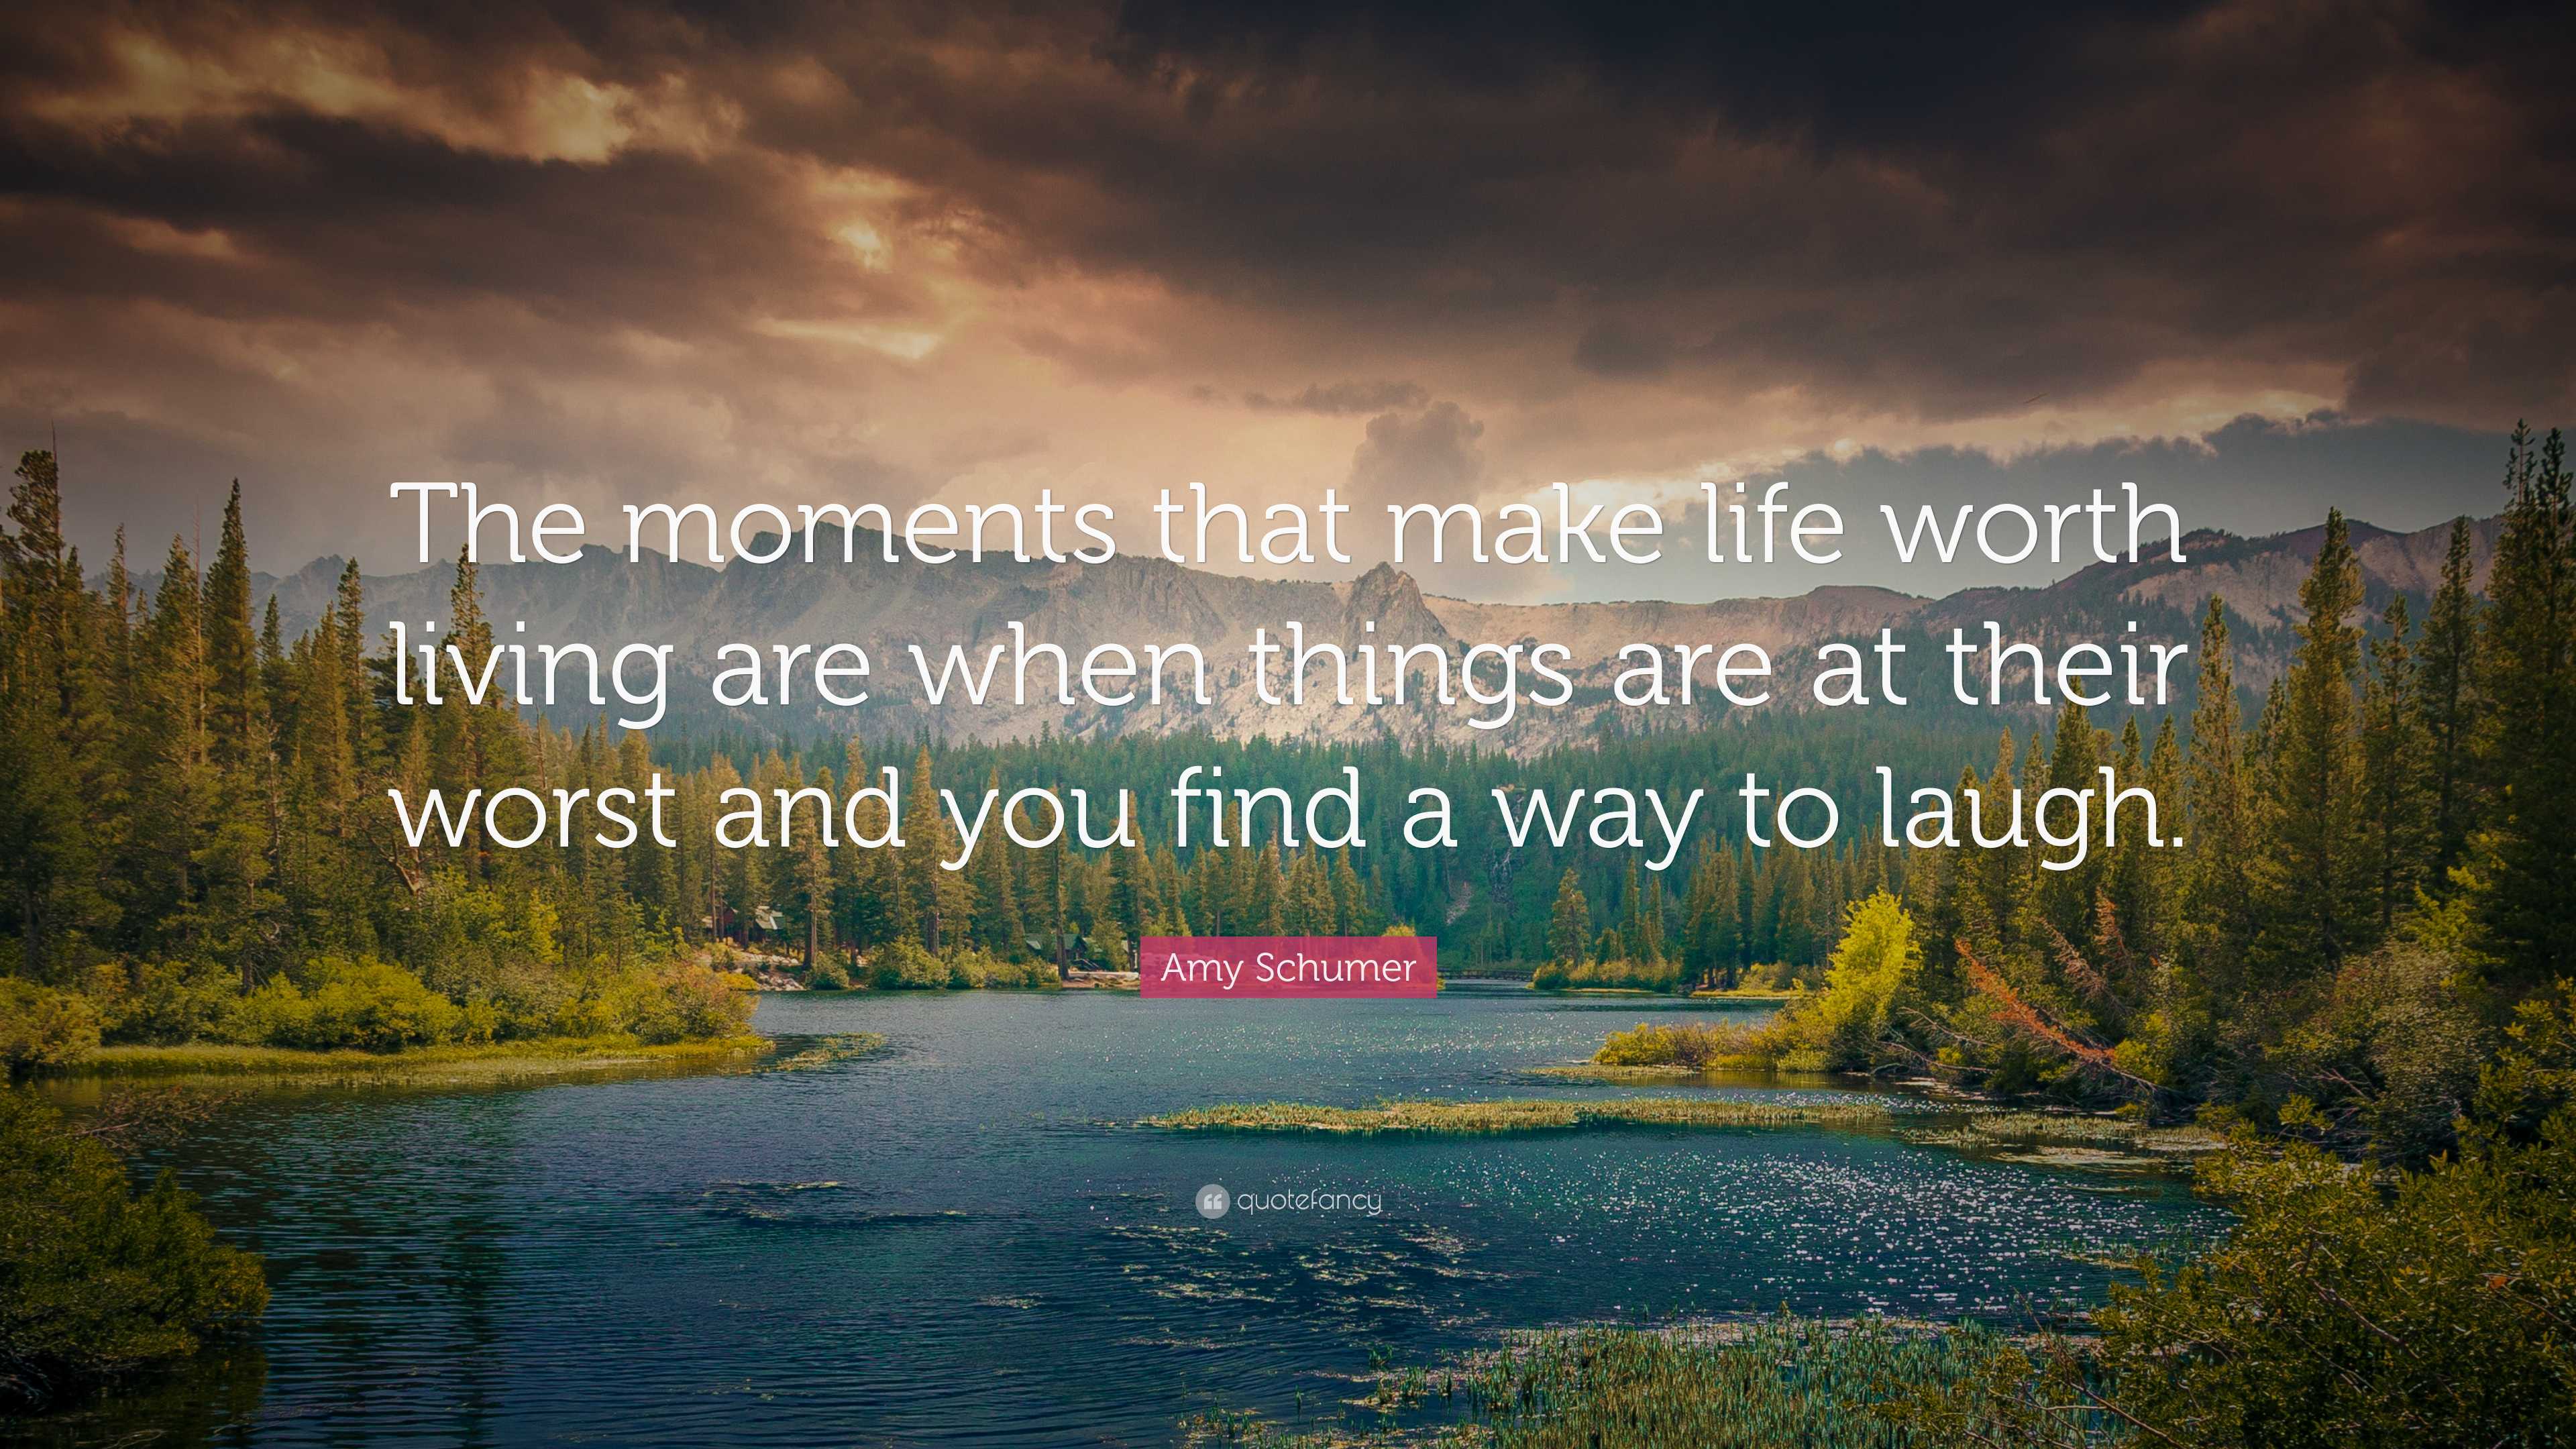 Amy Schumer Quote: “The moments that make life worth living are when ...